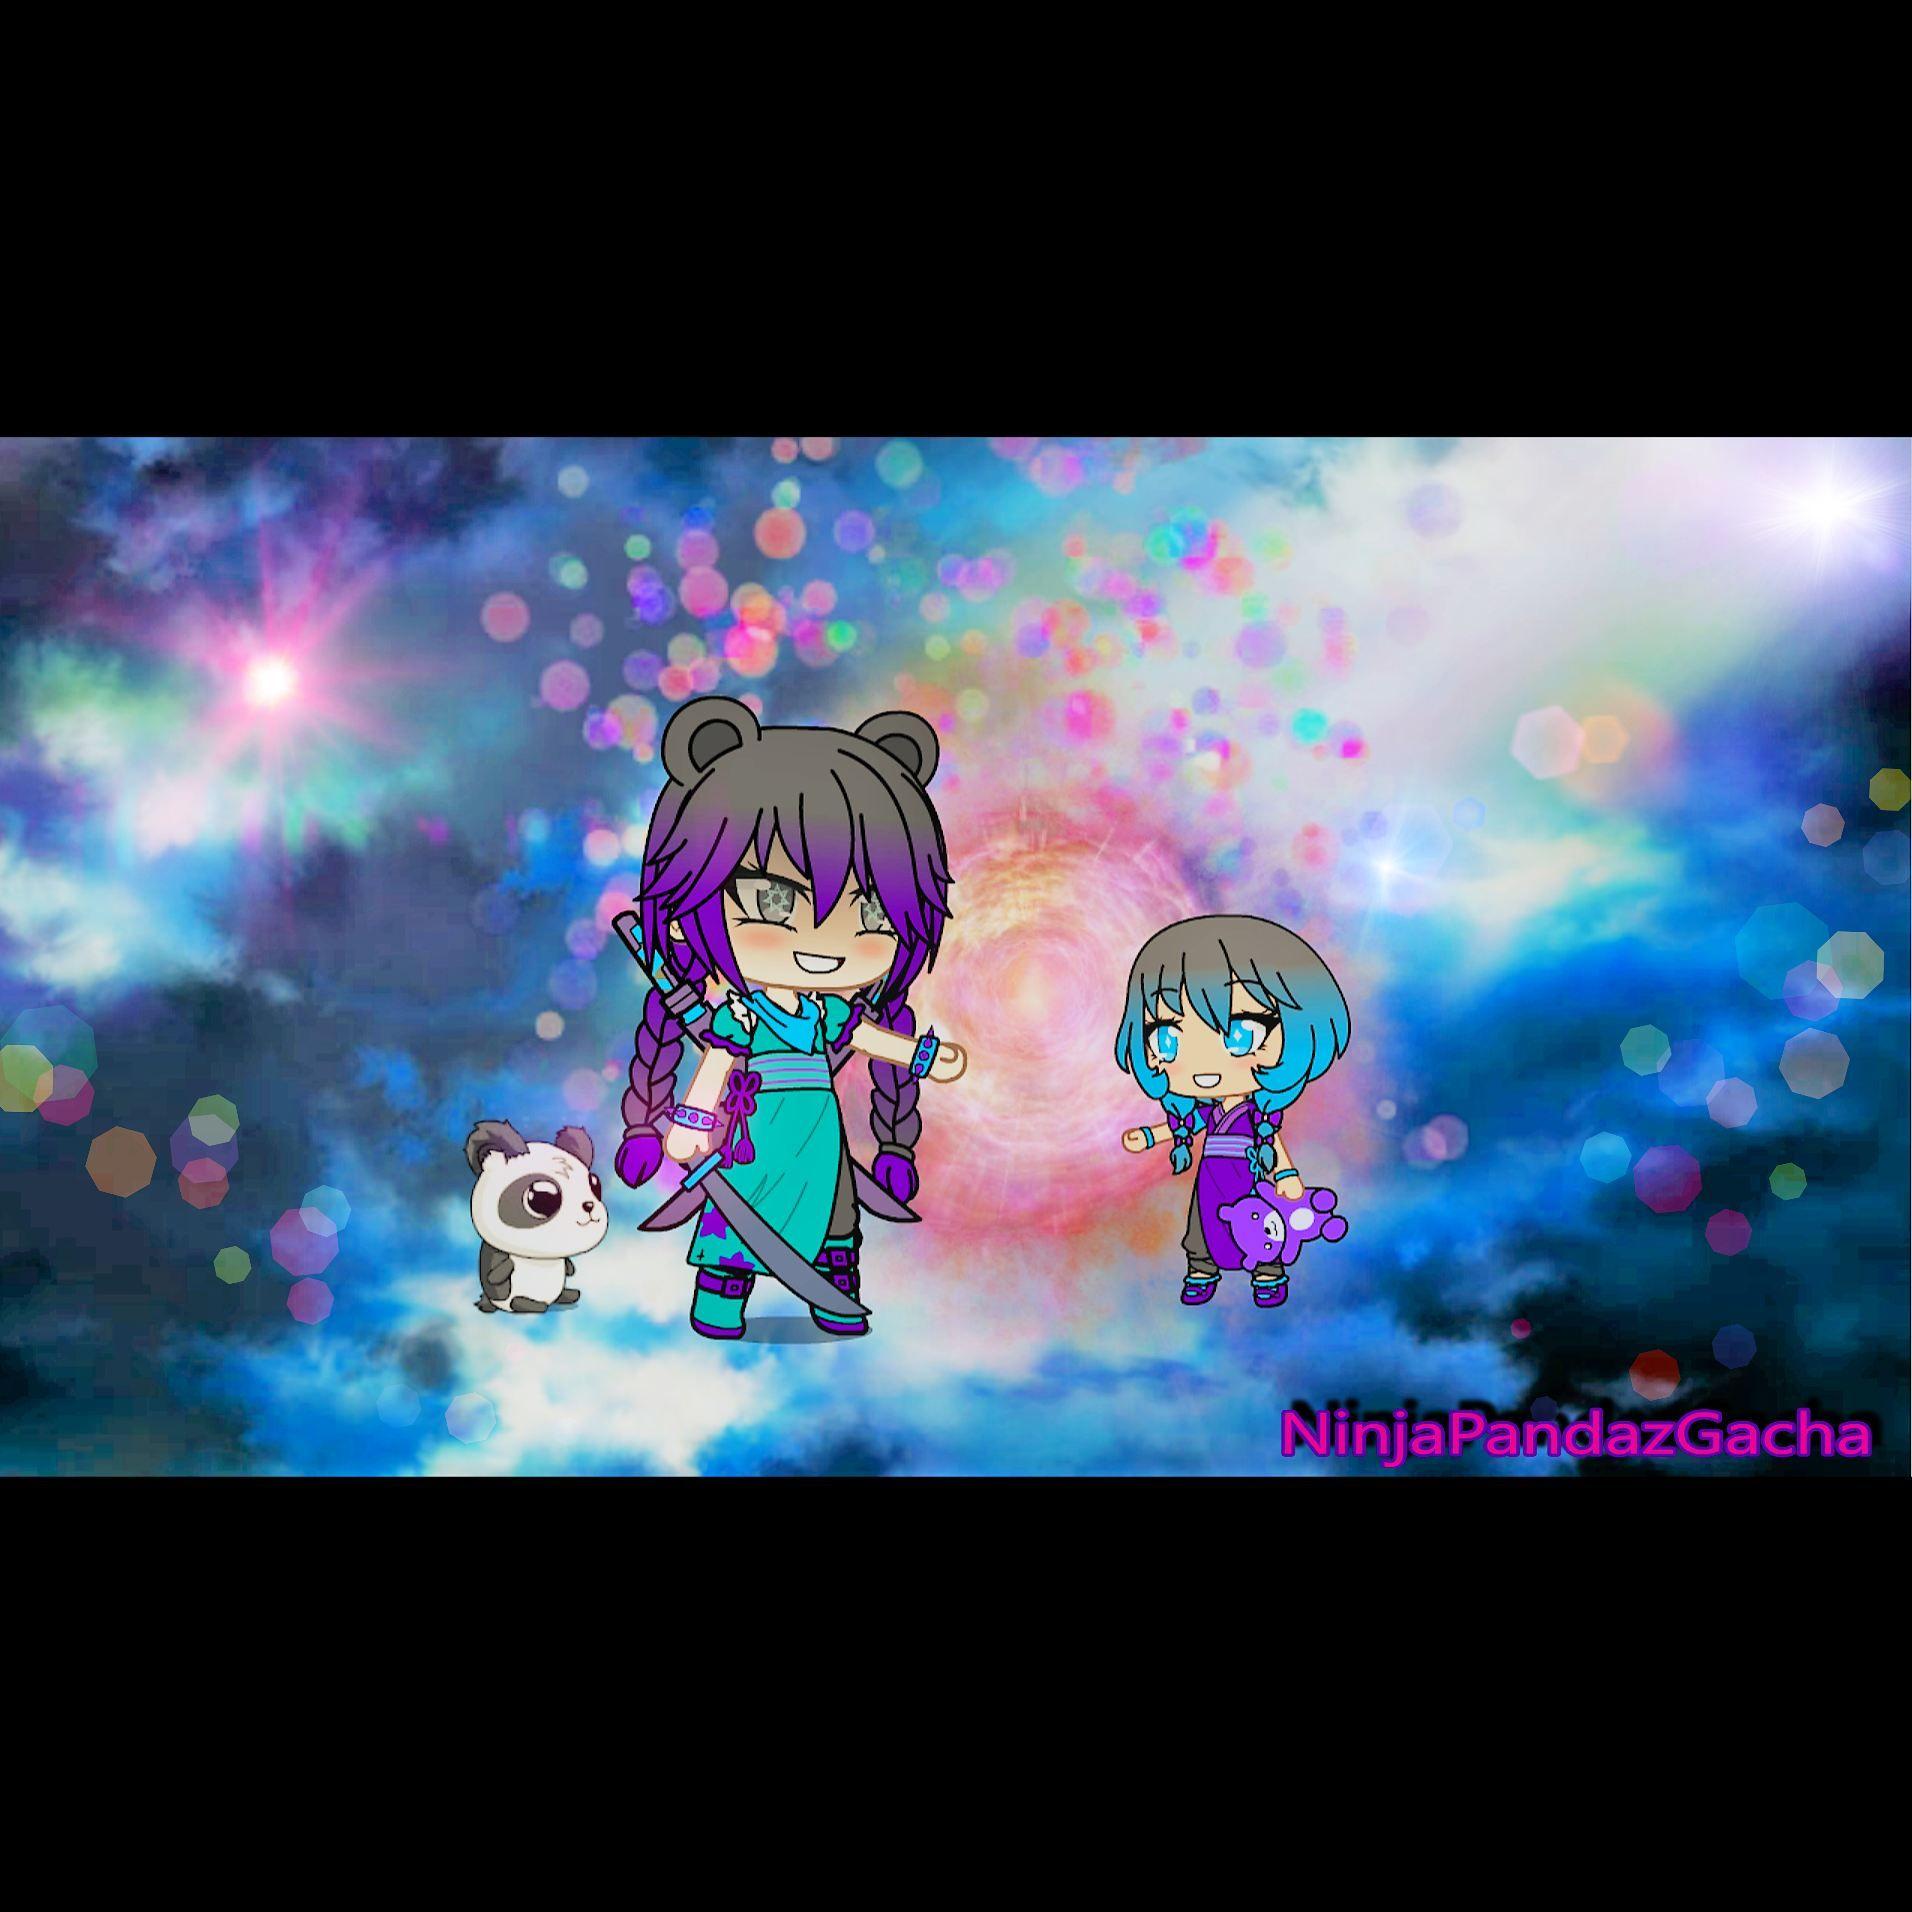 Made this for one of my gacha life music videos love how it